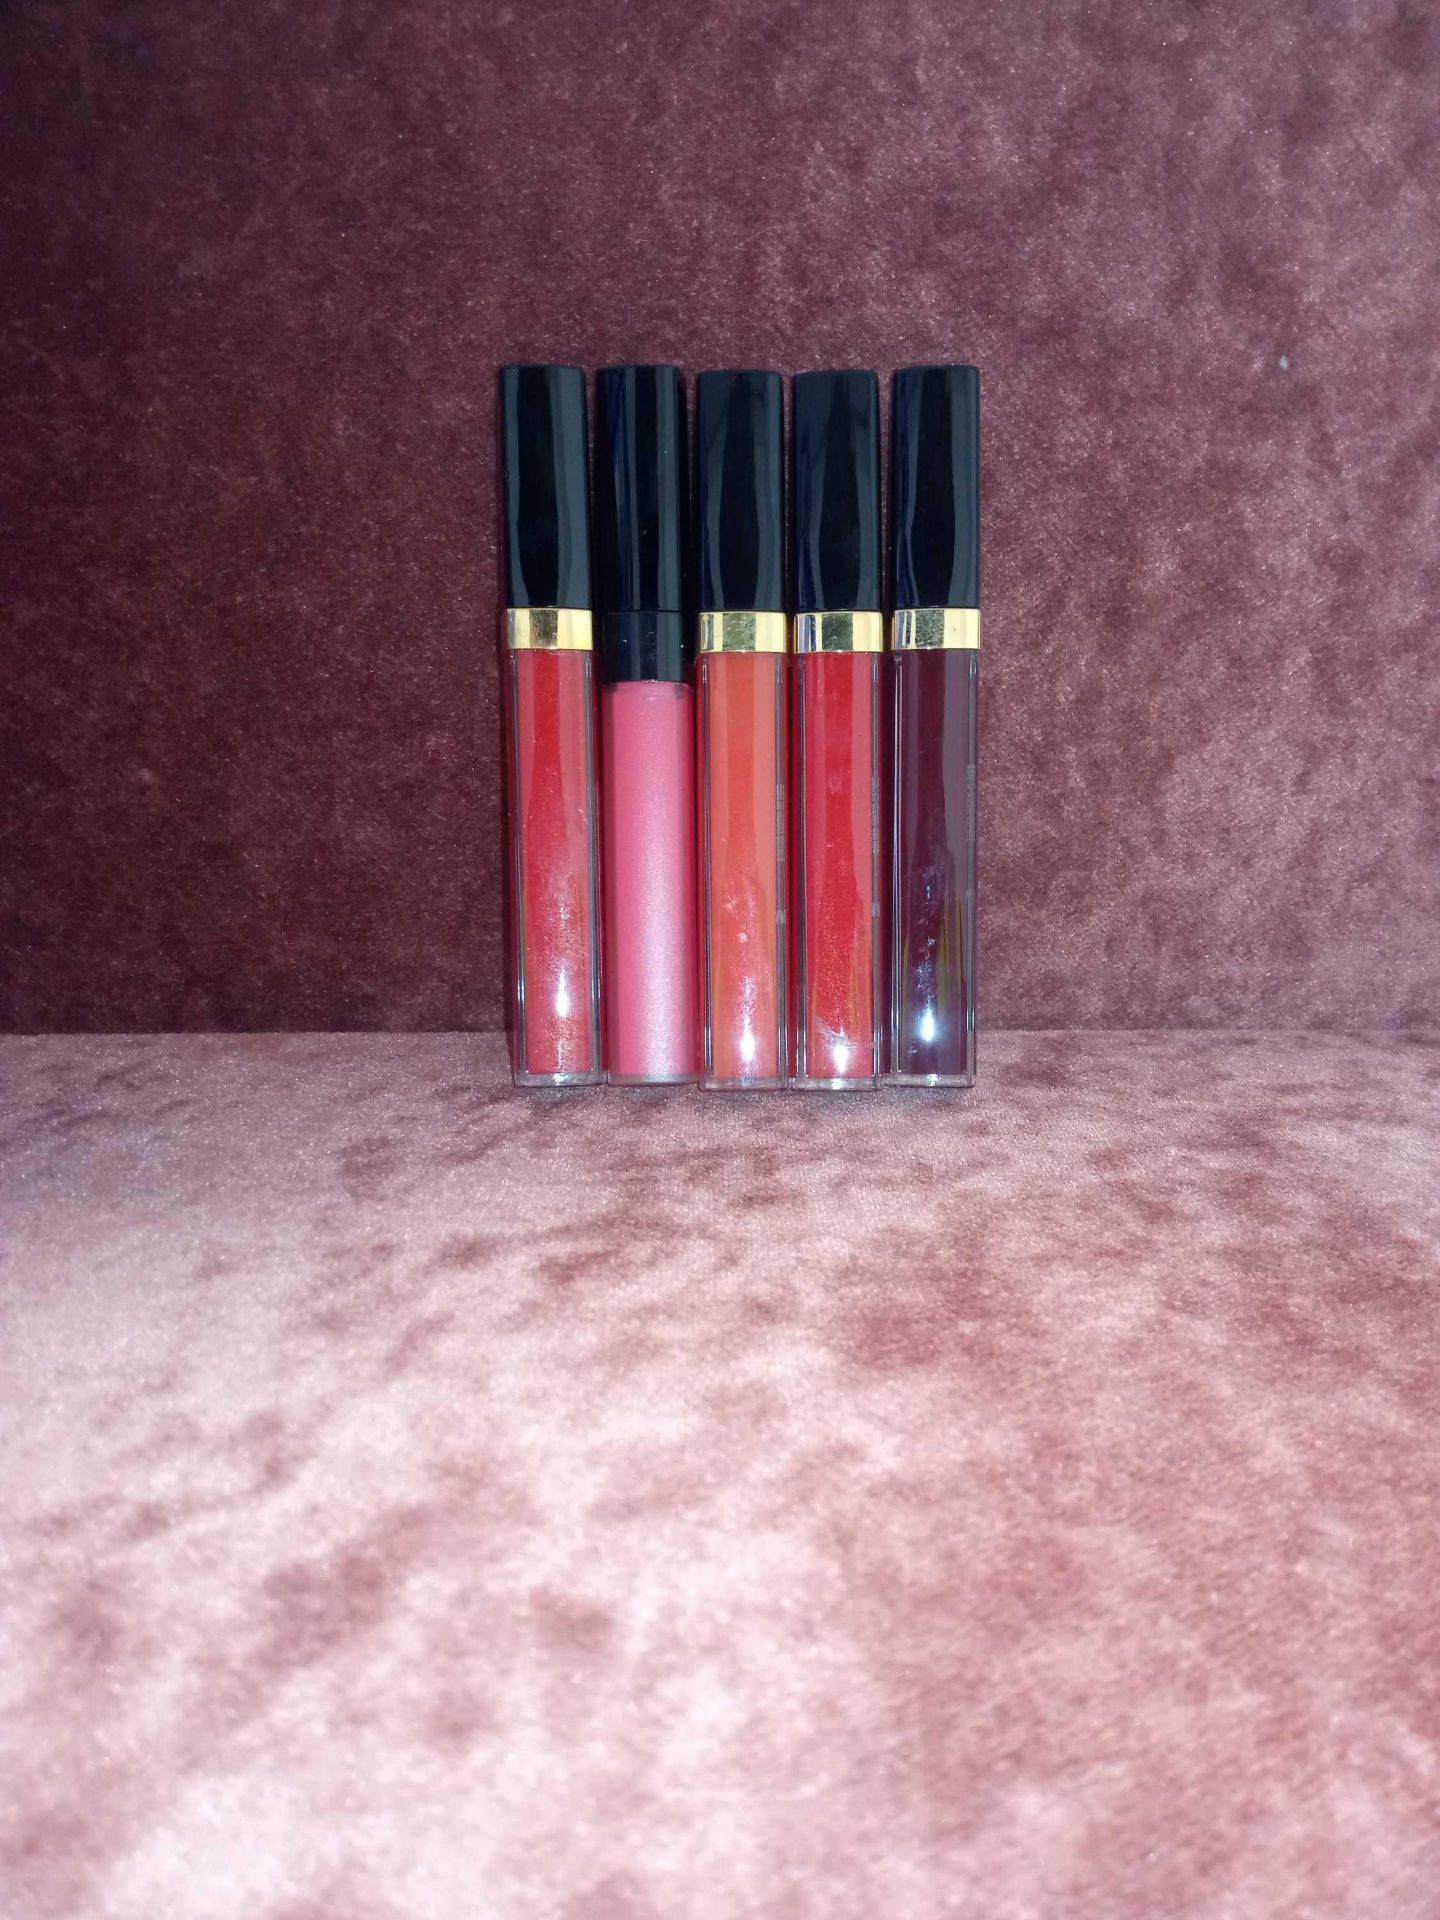 Combined RRP £150 Lot To Contain 5 Chanel Paris Coco Gloss Moisturising Glossimer In Assorted Shades